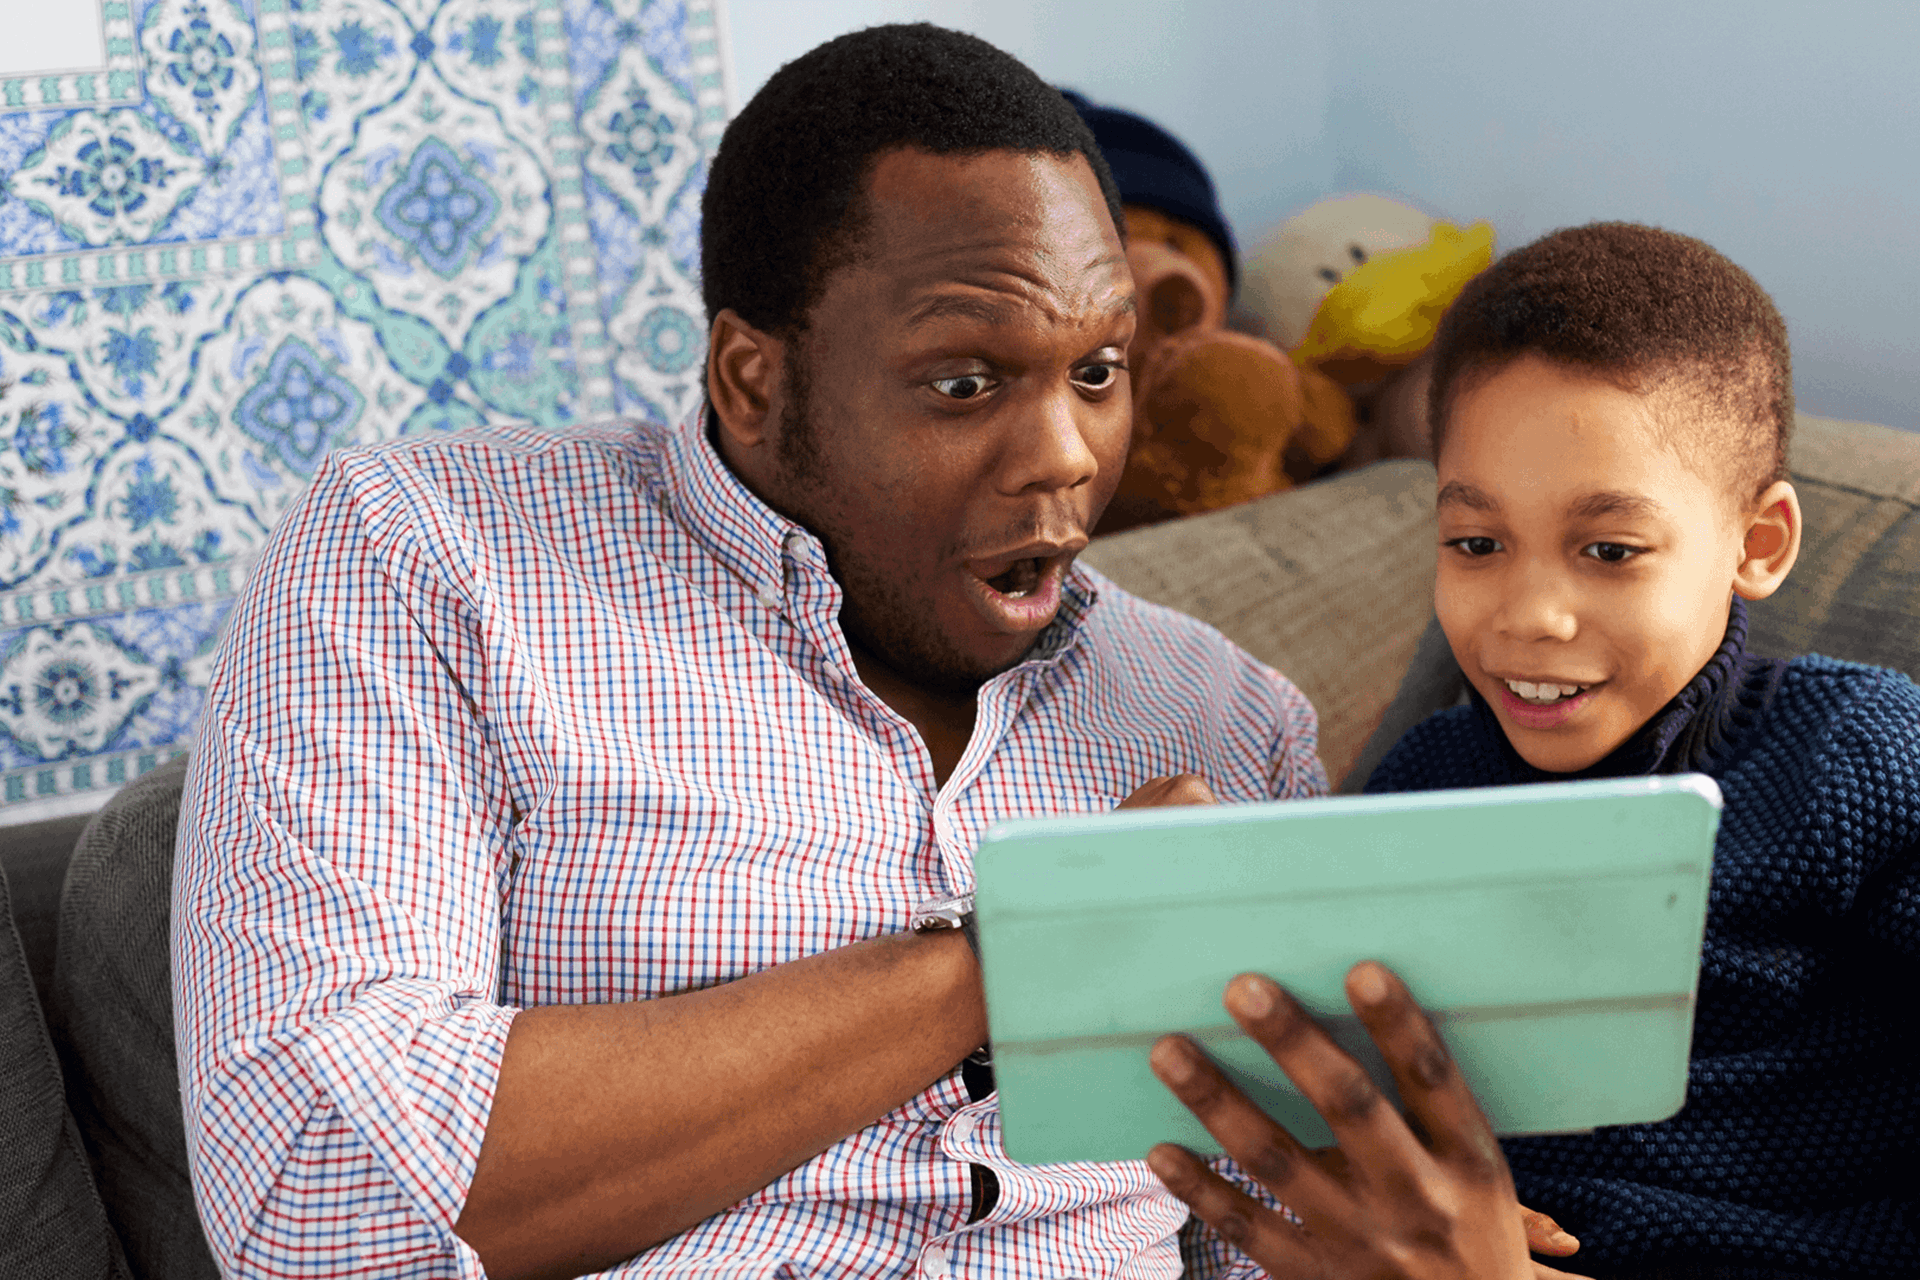 A father and son having lots of fun together on the sofa with a tablet